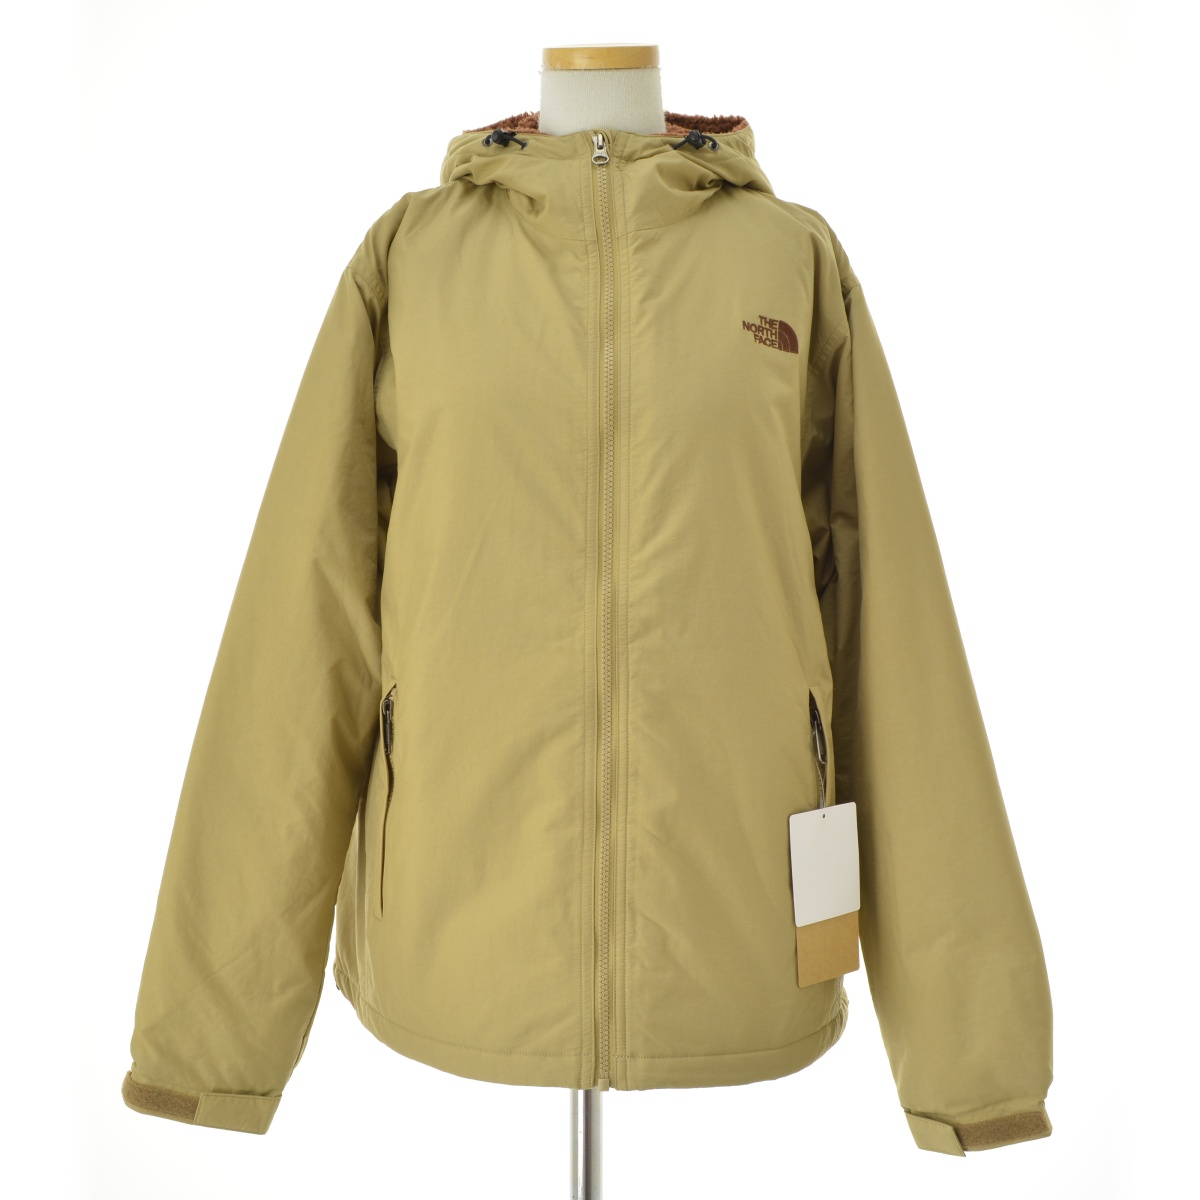 THE NORTH FACE / ΡեθNPW72330 Compact Nomad Jacket ѥ Υޥ KC ץߥץΥ㥱åȡרܺٲ